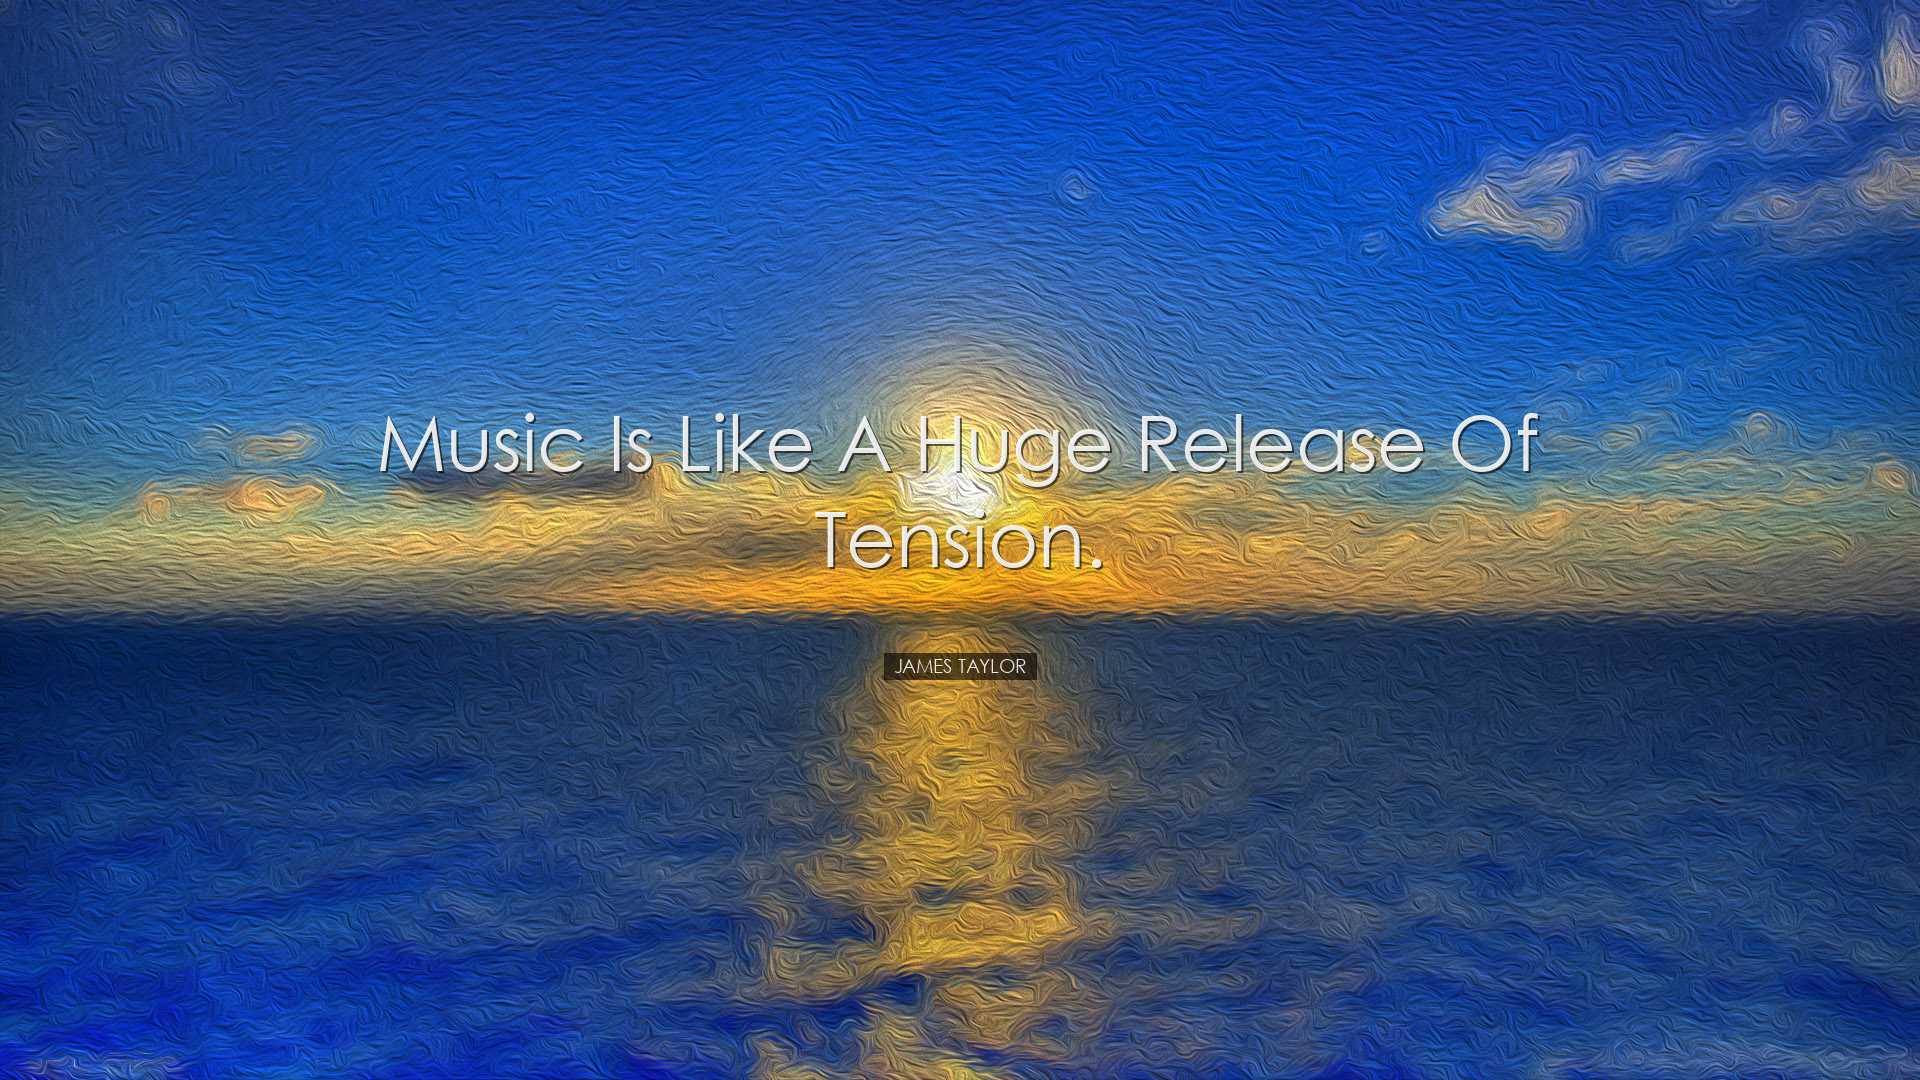 Music is like a huge release of tension. - James Taylor